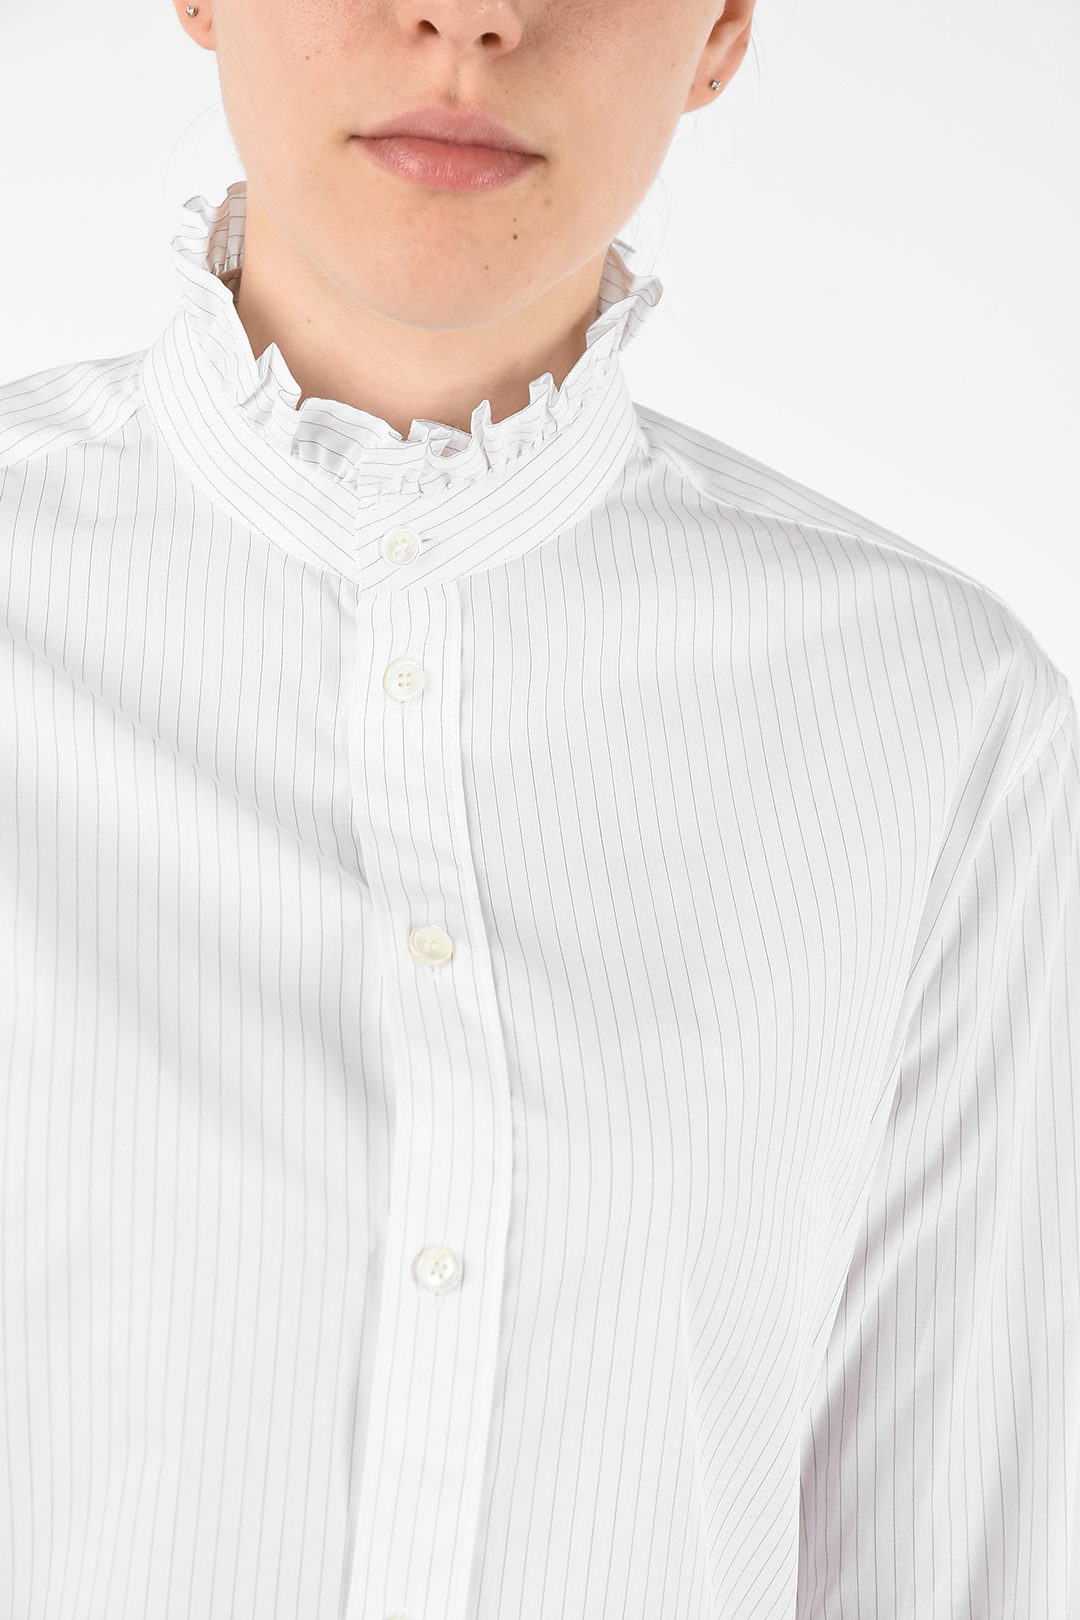 Celine awning striped ruffle collar blouse women - Glamood Outlet